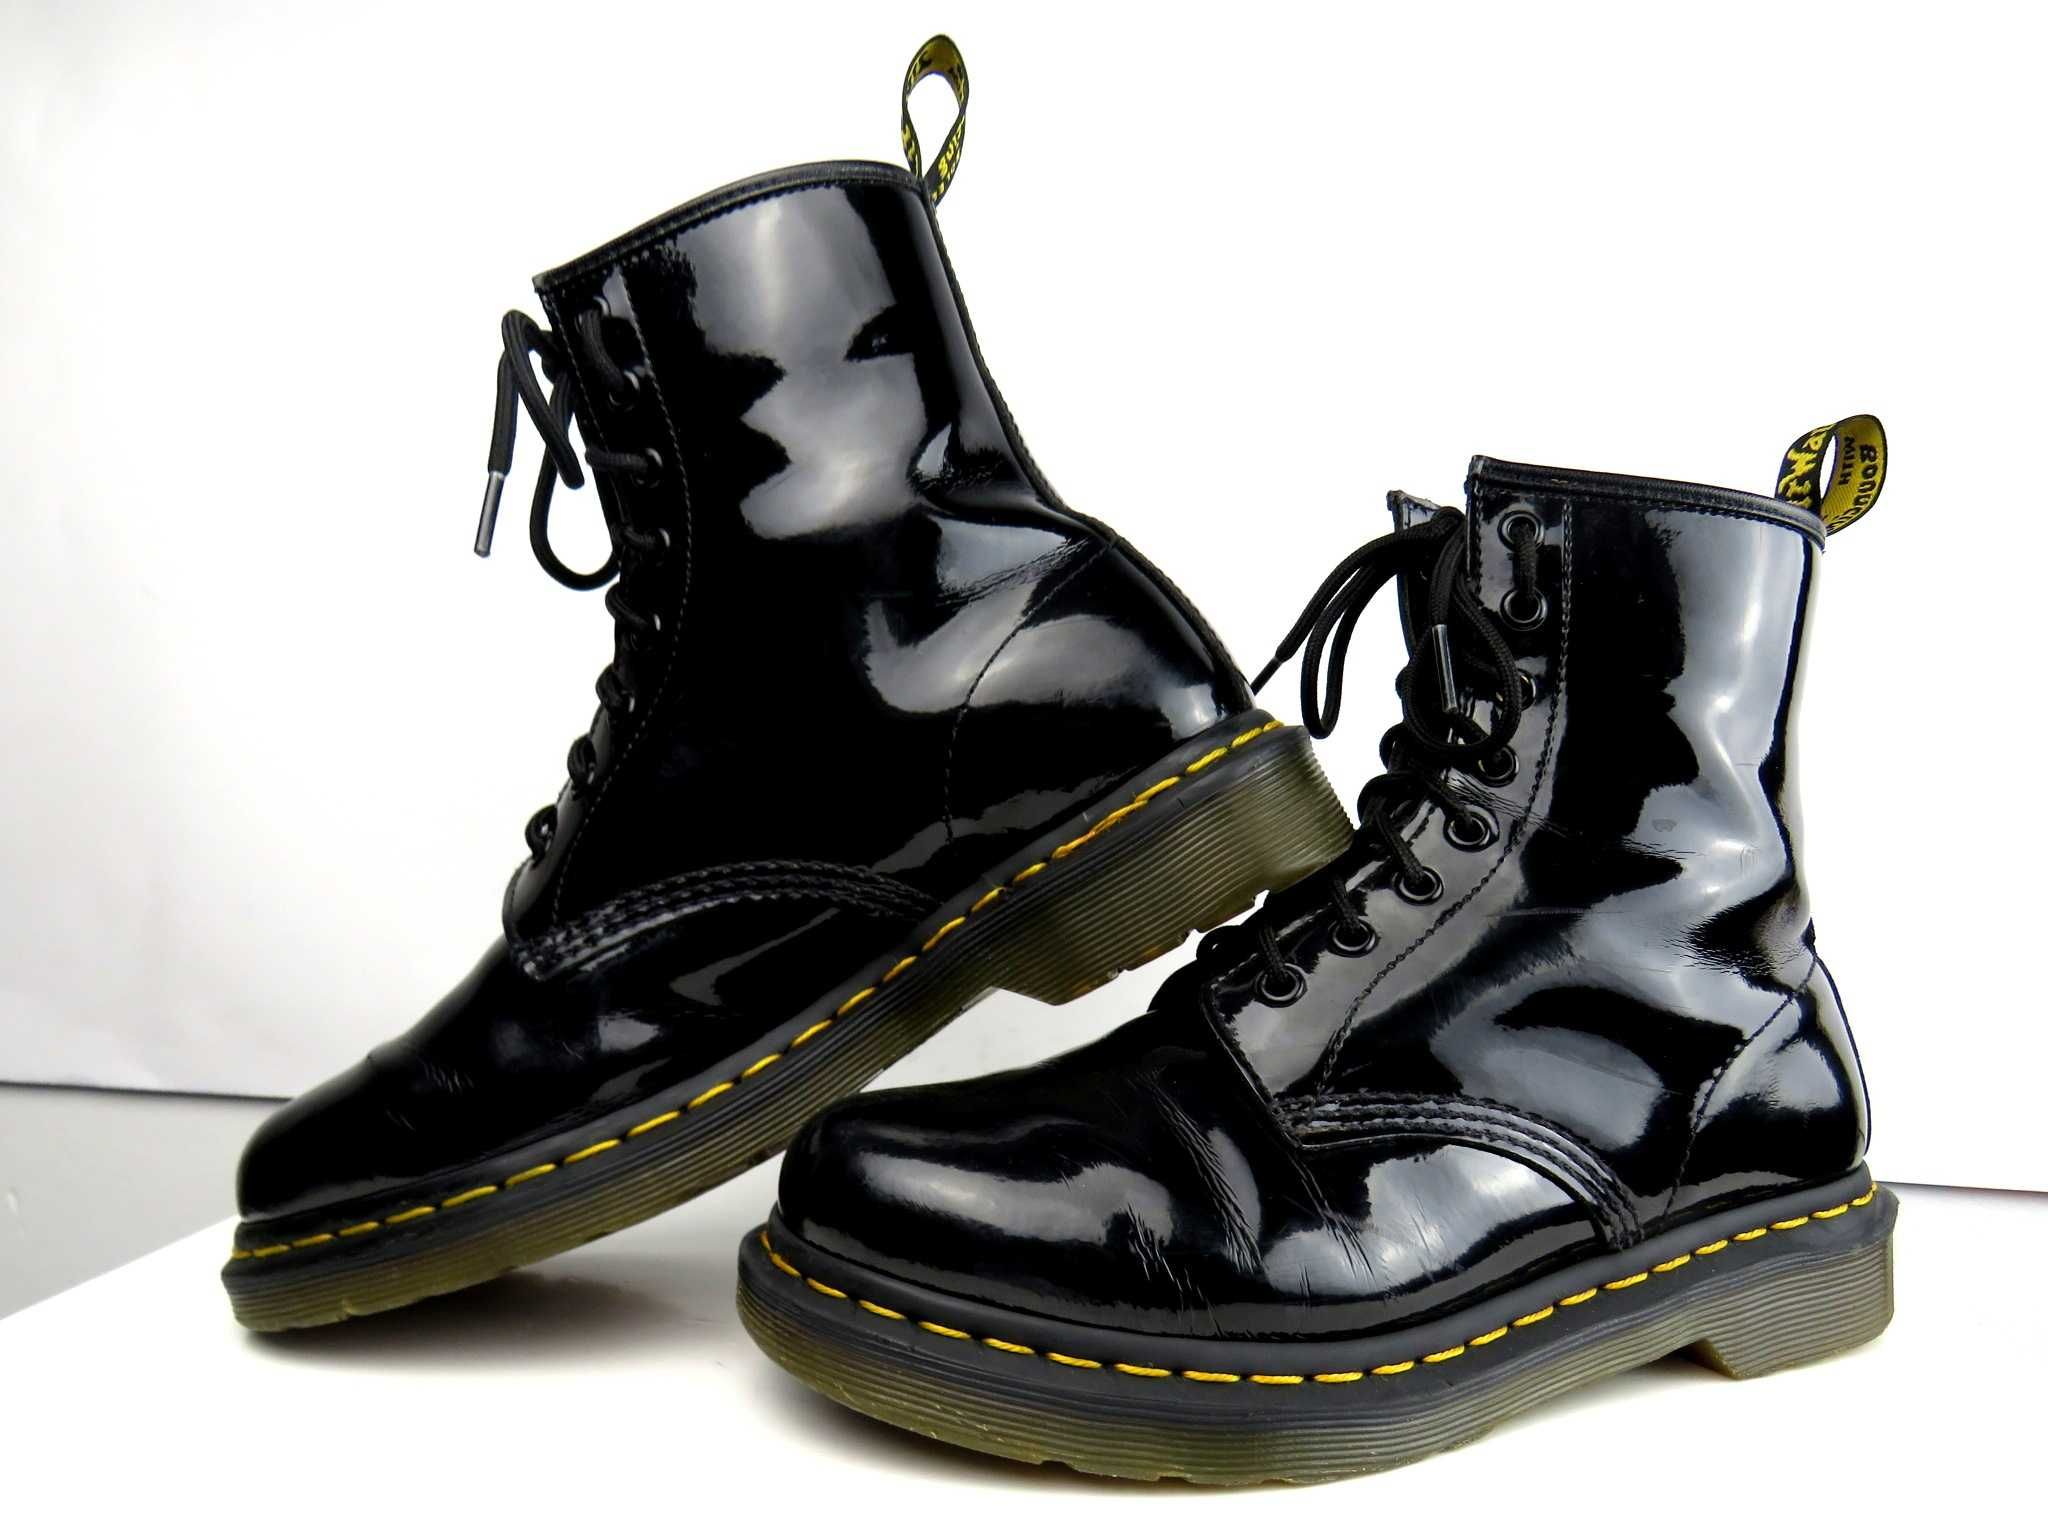 Dr. Martens 1460 buty glany r 41 -50%